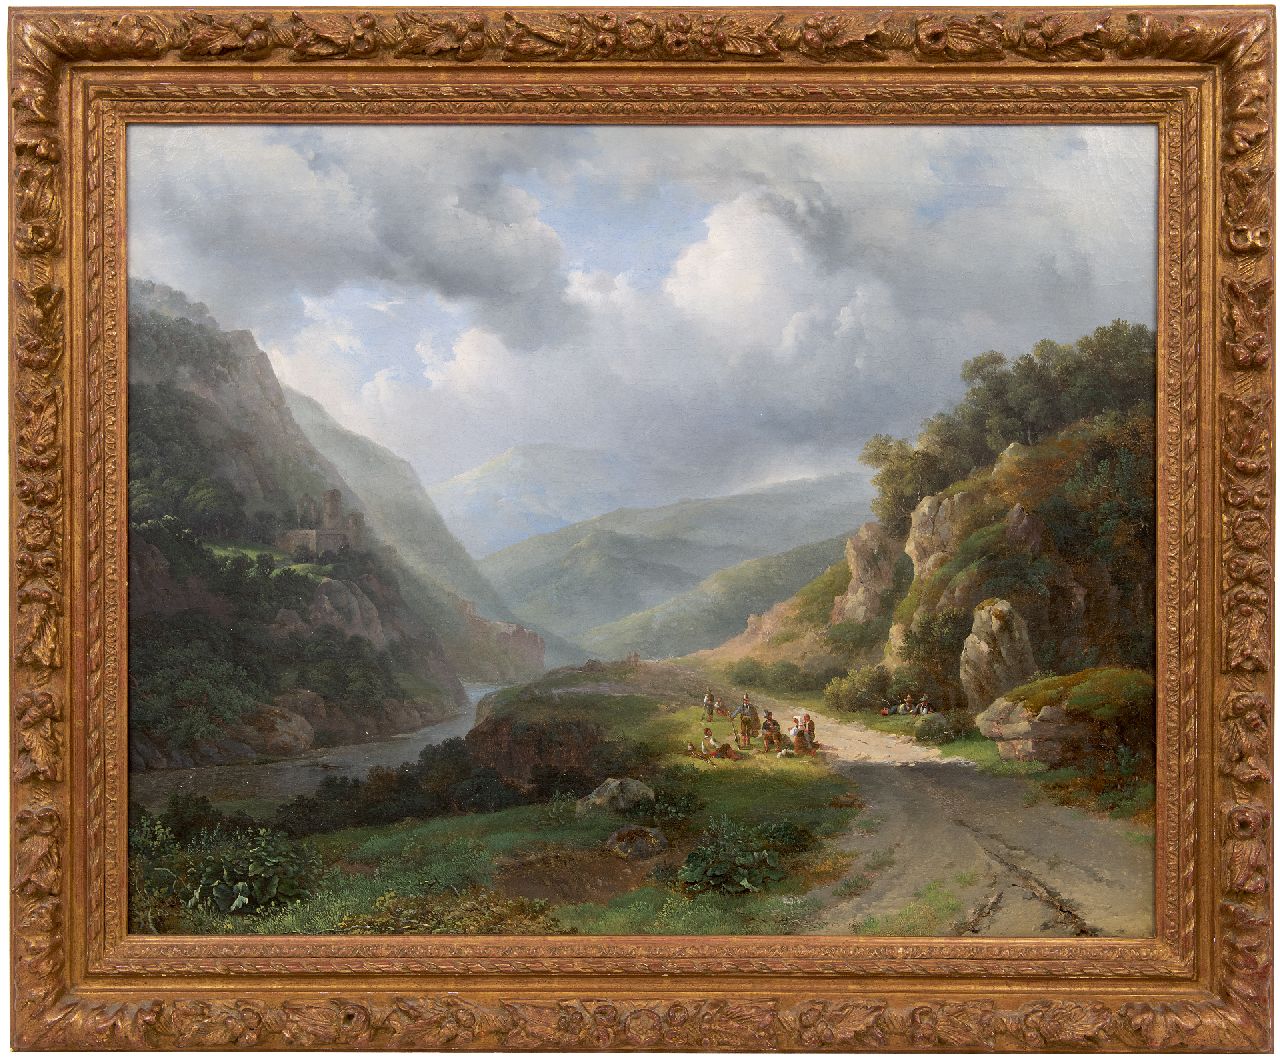 Meijer J.H.L.  | Johan Hendrik 'Louis' Meijer | Paintings offered for sale | Mountain landscape with figures, oil on canvas 67.4 x 84.7 cm, signed c.l.